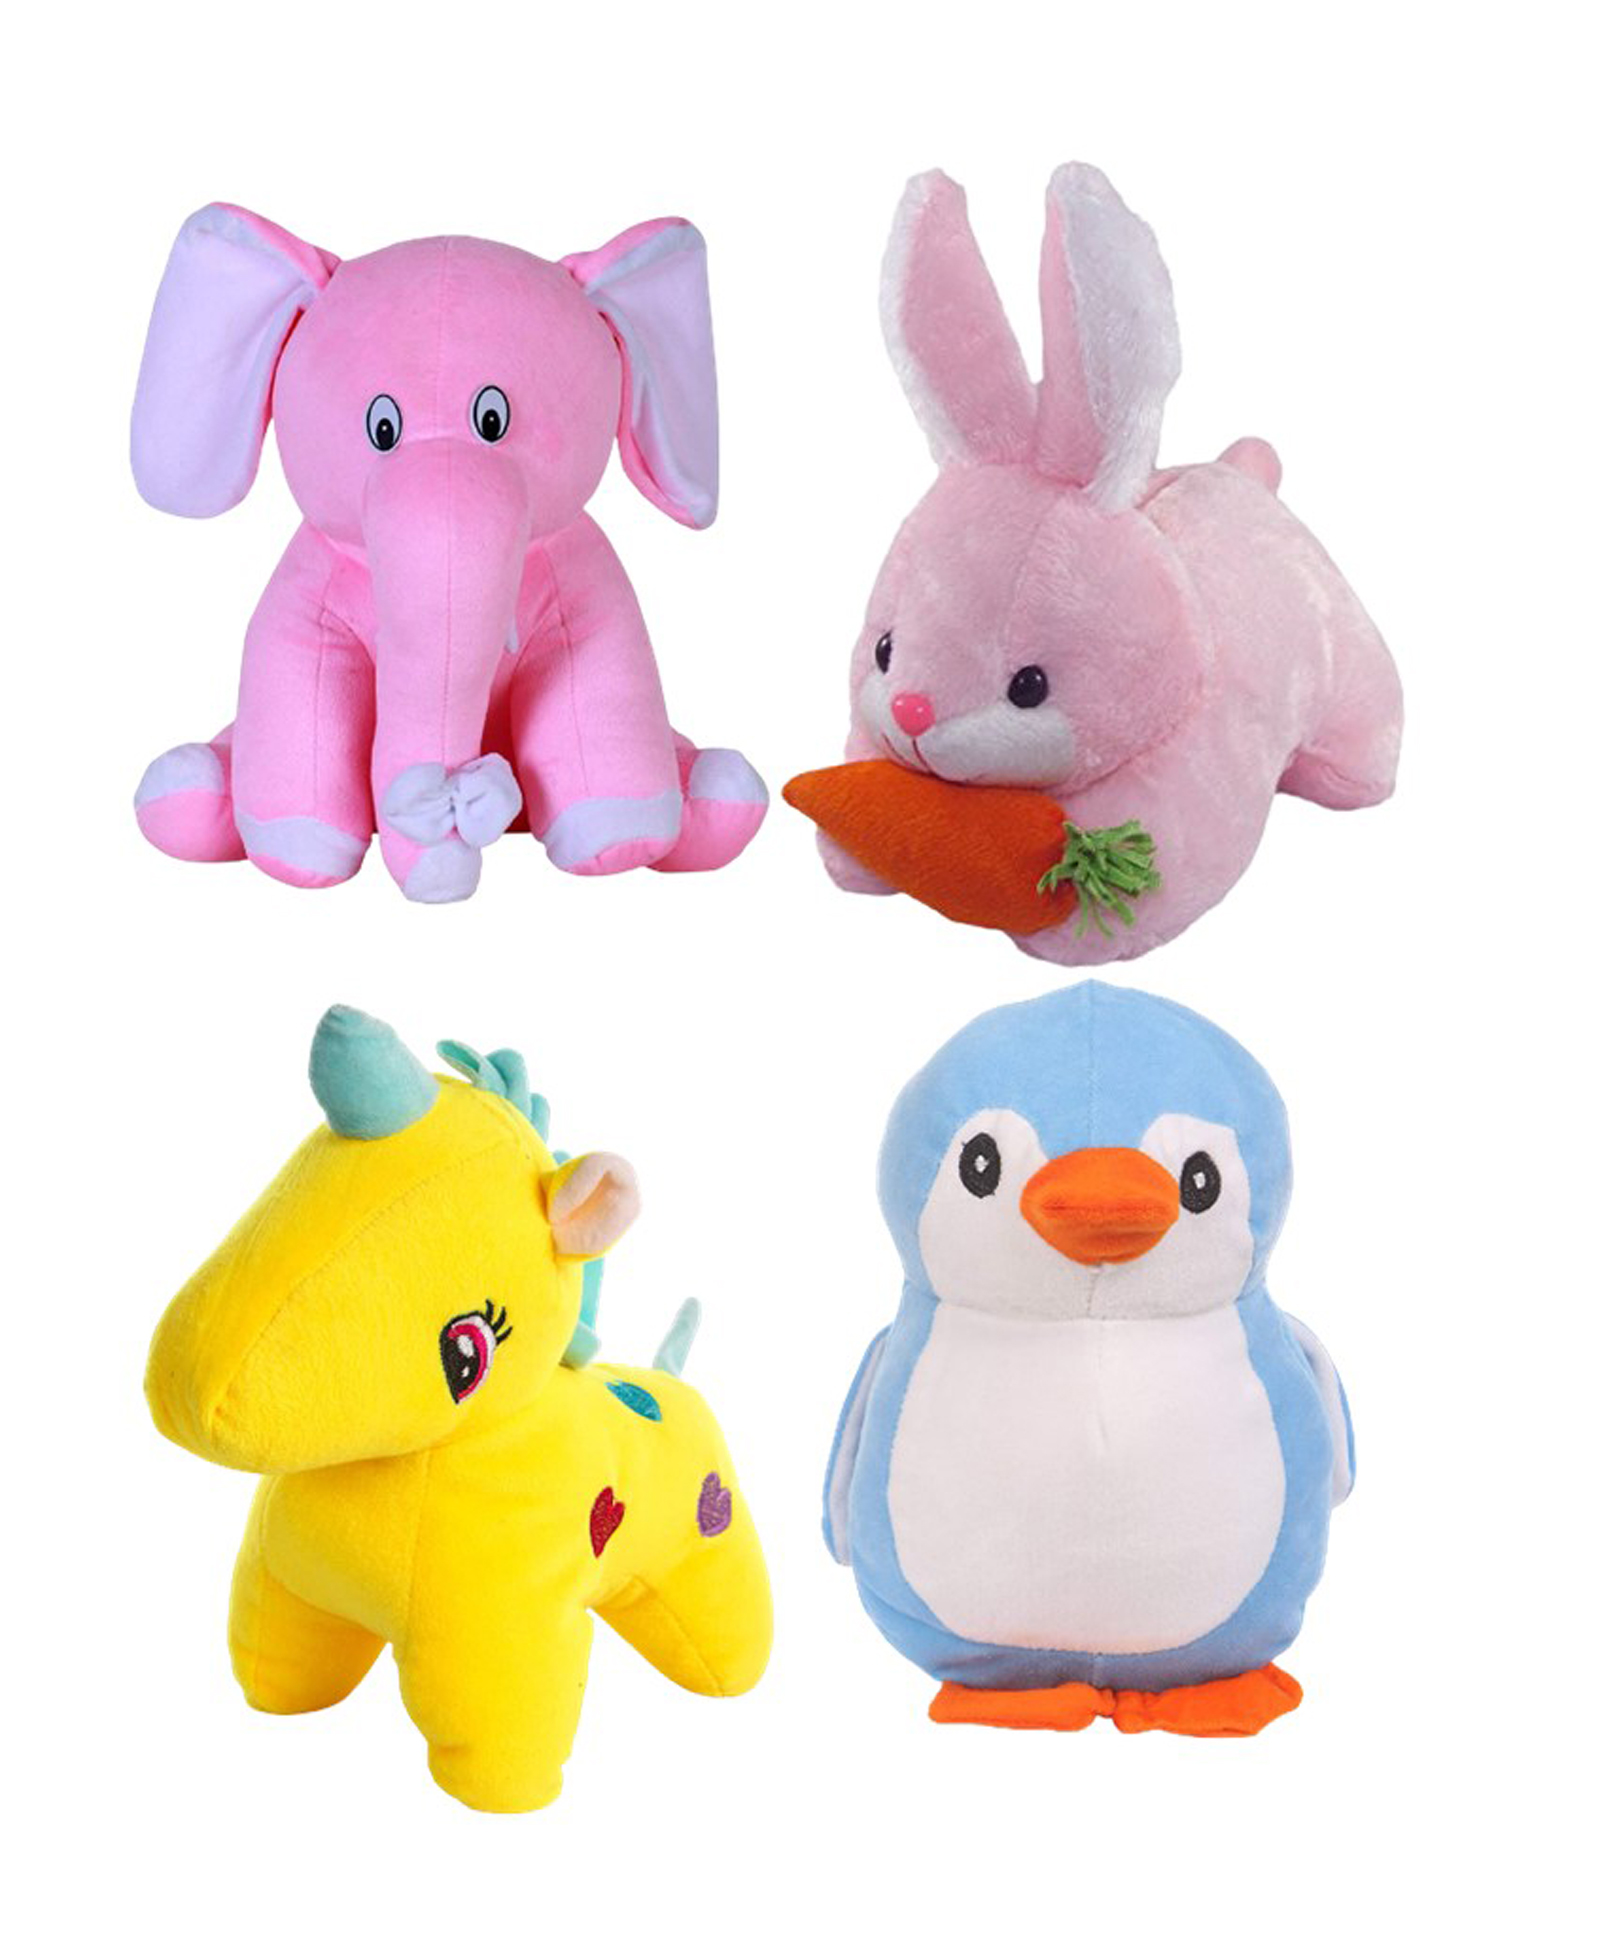 Deals India Combo of 4 Super Soft Plush Toys Multicolor - Height 25 cm  Online India, Buy Soft Toys for (3-8 Years) at  - 9629680